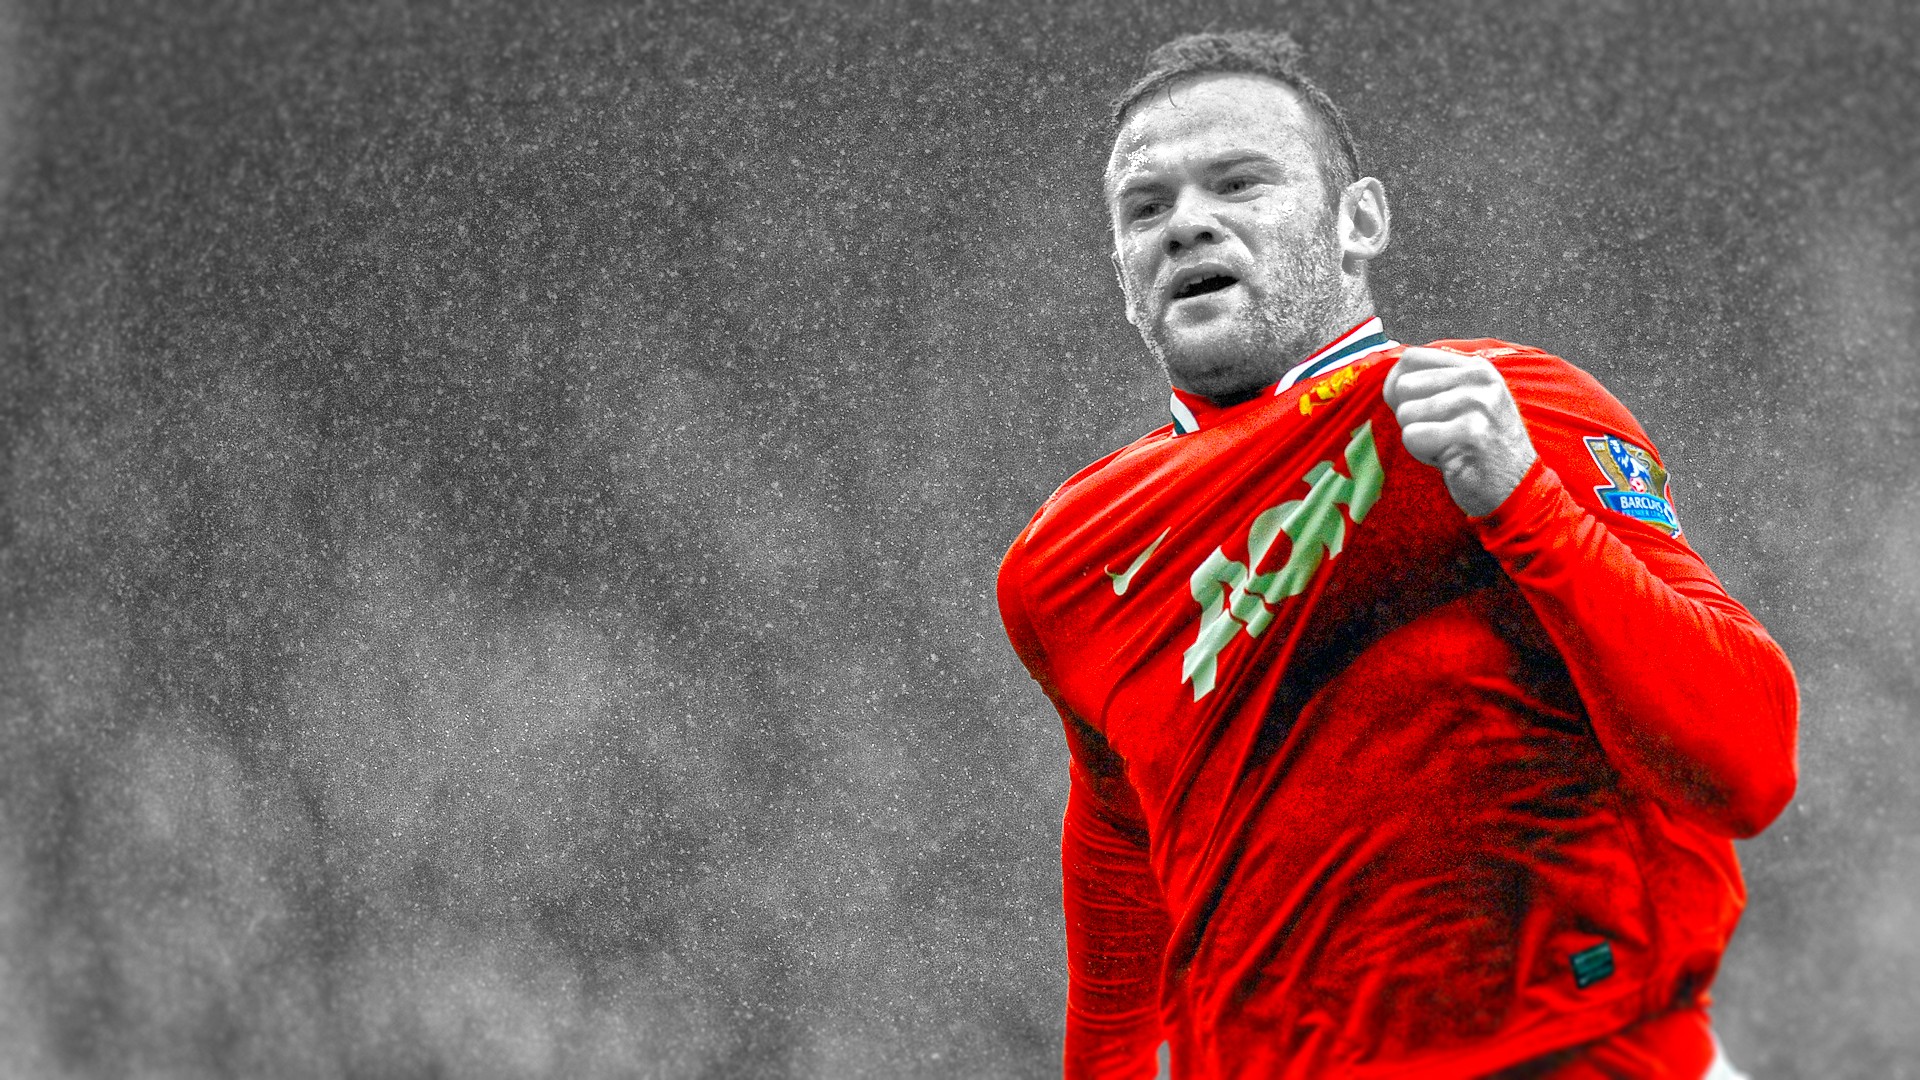 Wayne Rooney HD Picture Snowy Background